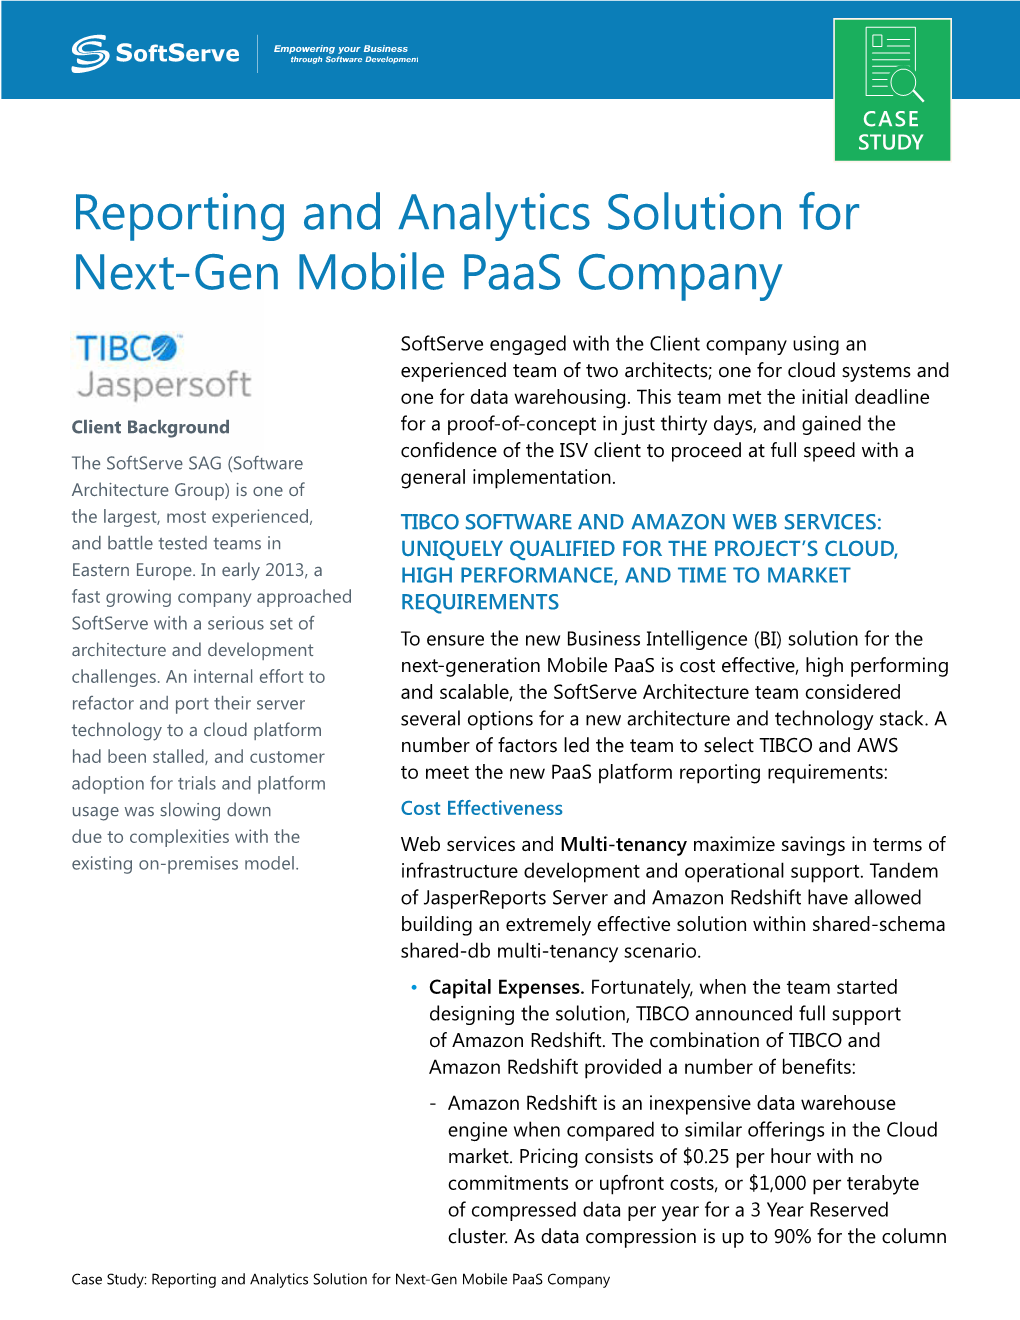 Reporting and Analytics Solution for Next-Gen Mobile Paas Company